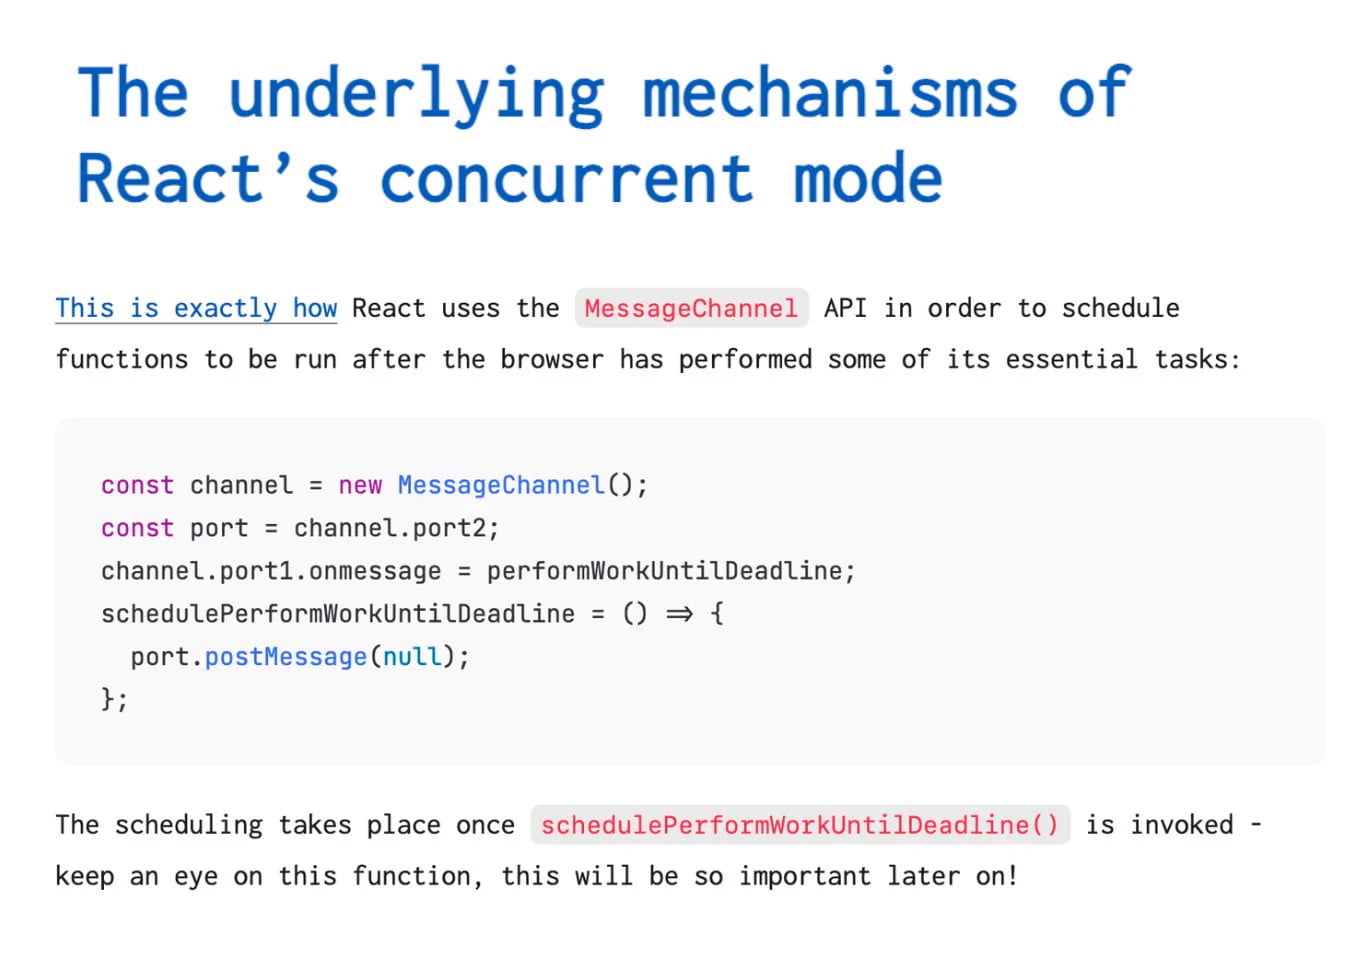 The underlying mechanisms of React’s concurrent mode